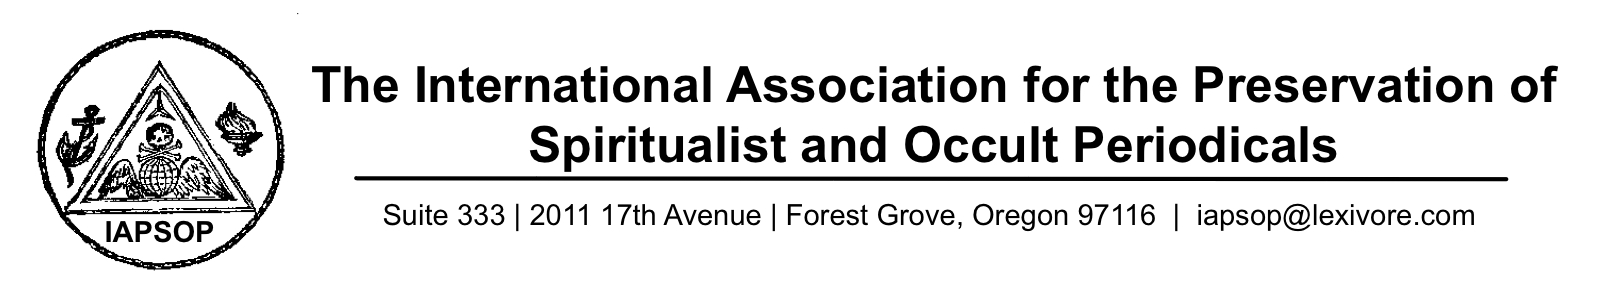 International Association for the Preservation of Spiritualist and Occult Periodicals